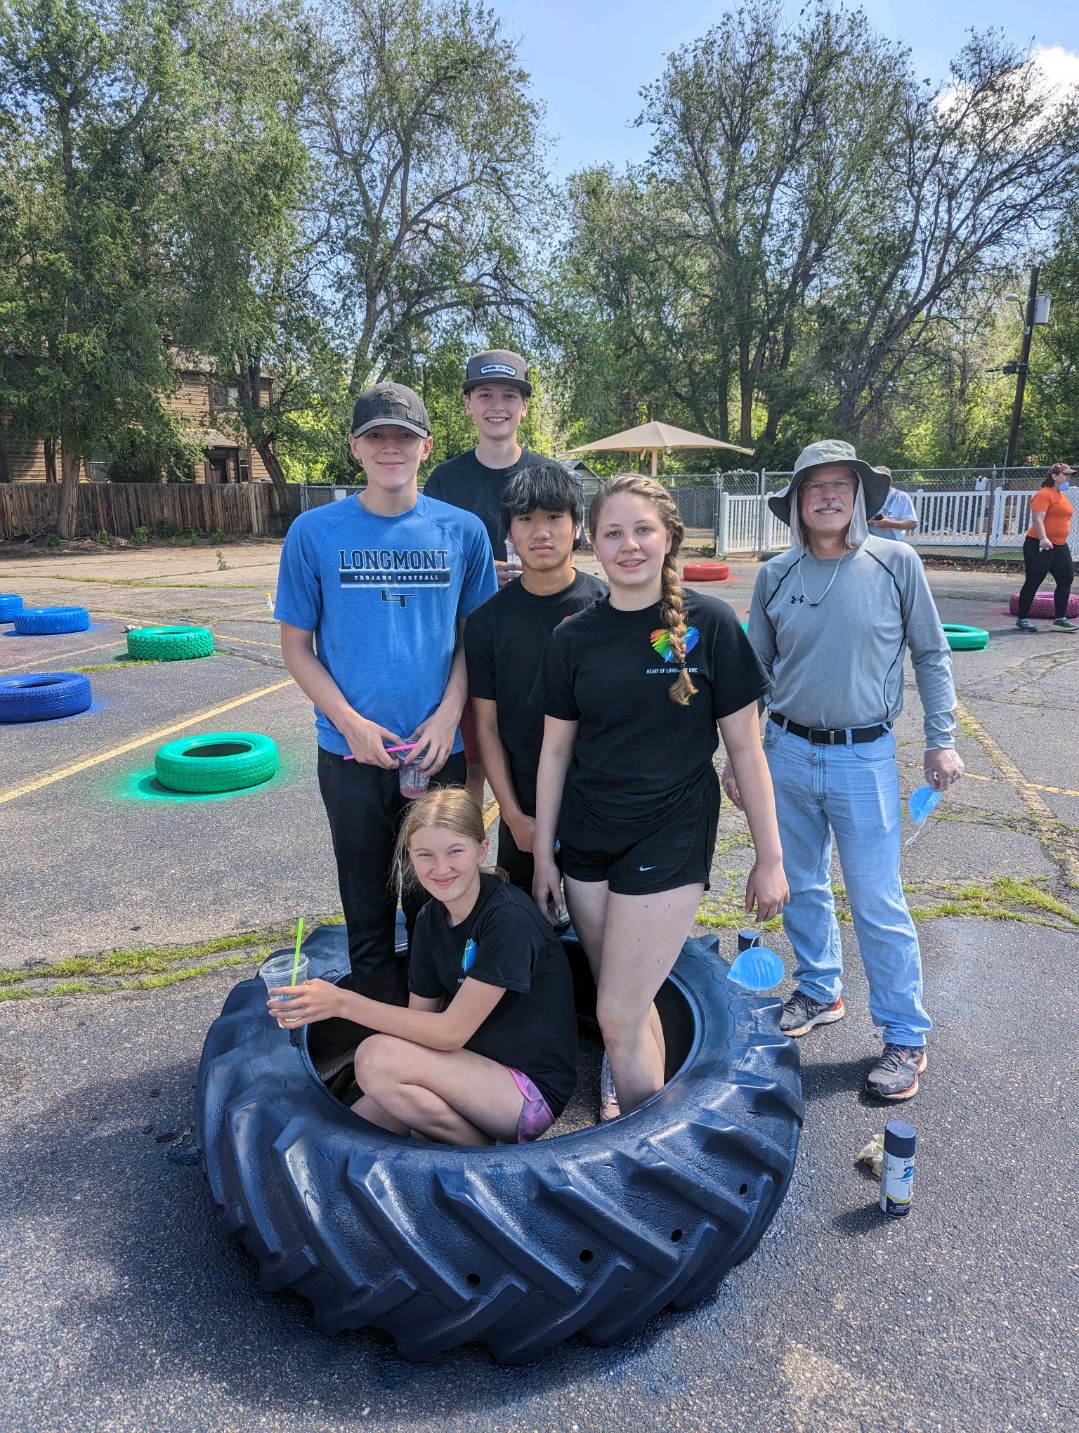 A photo of HOL youth group members in a large tire in front of tires that have been painted in the HOL parking lot for the outdoor learning center